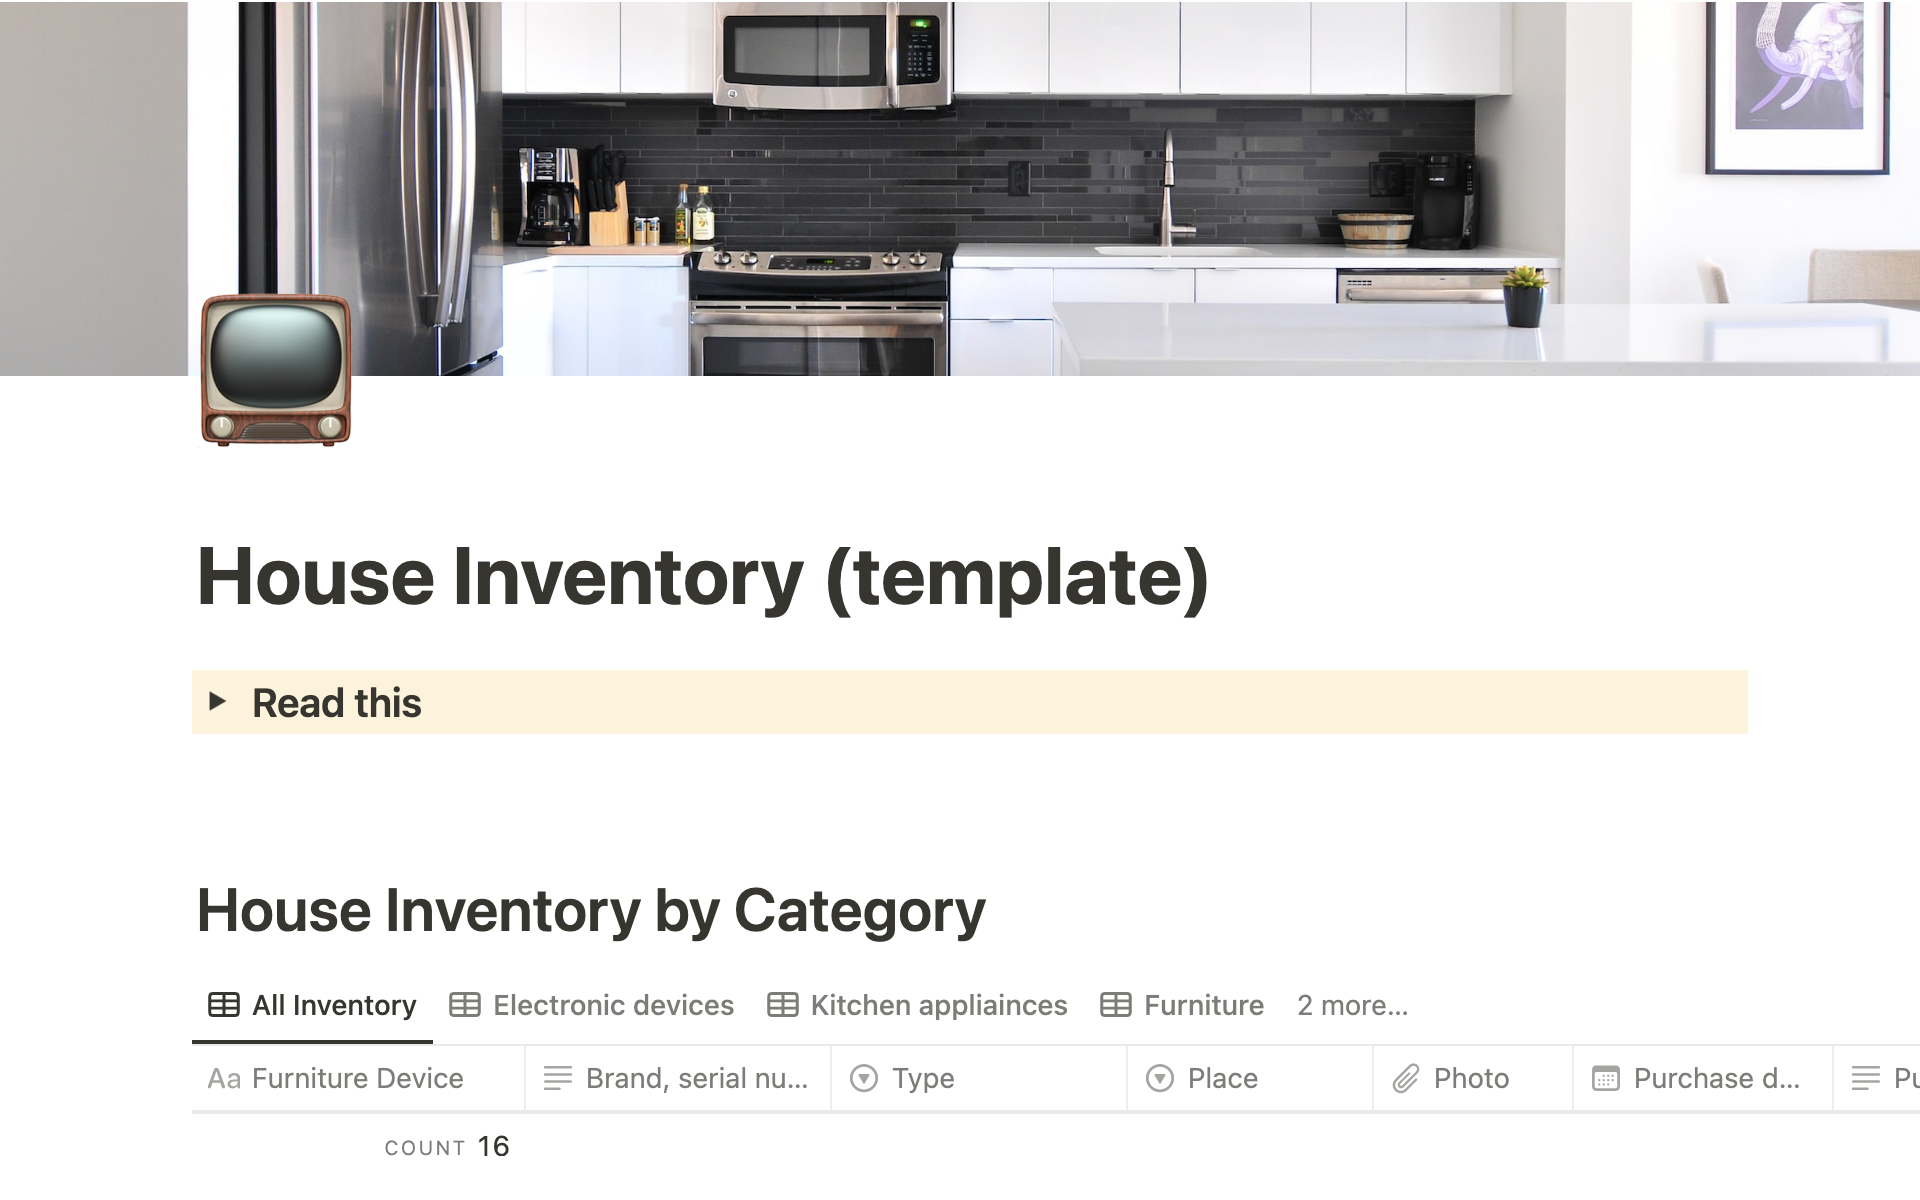 Manage all your house inventory: furniture, appliances in one place.